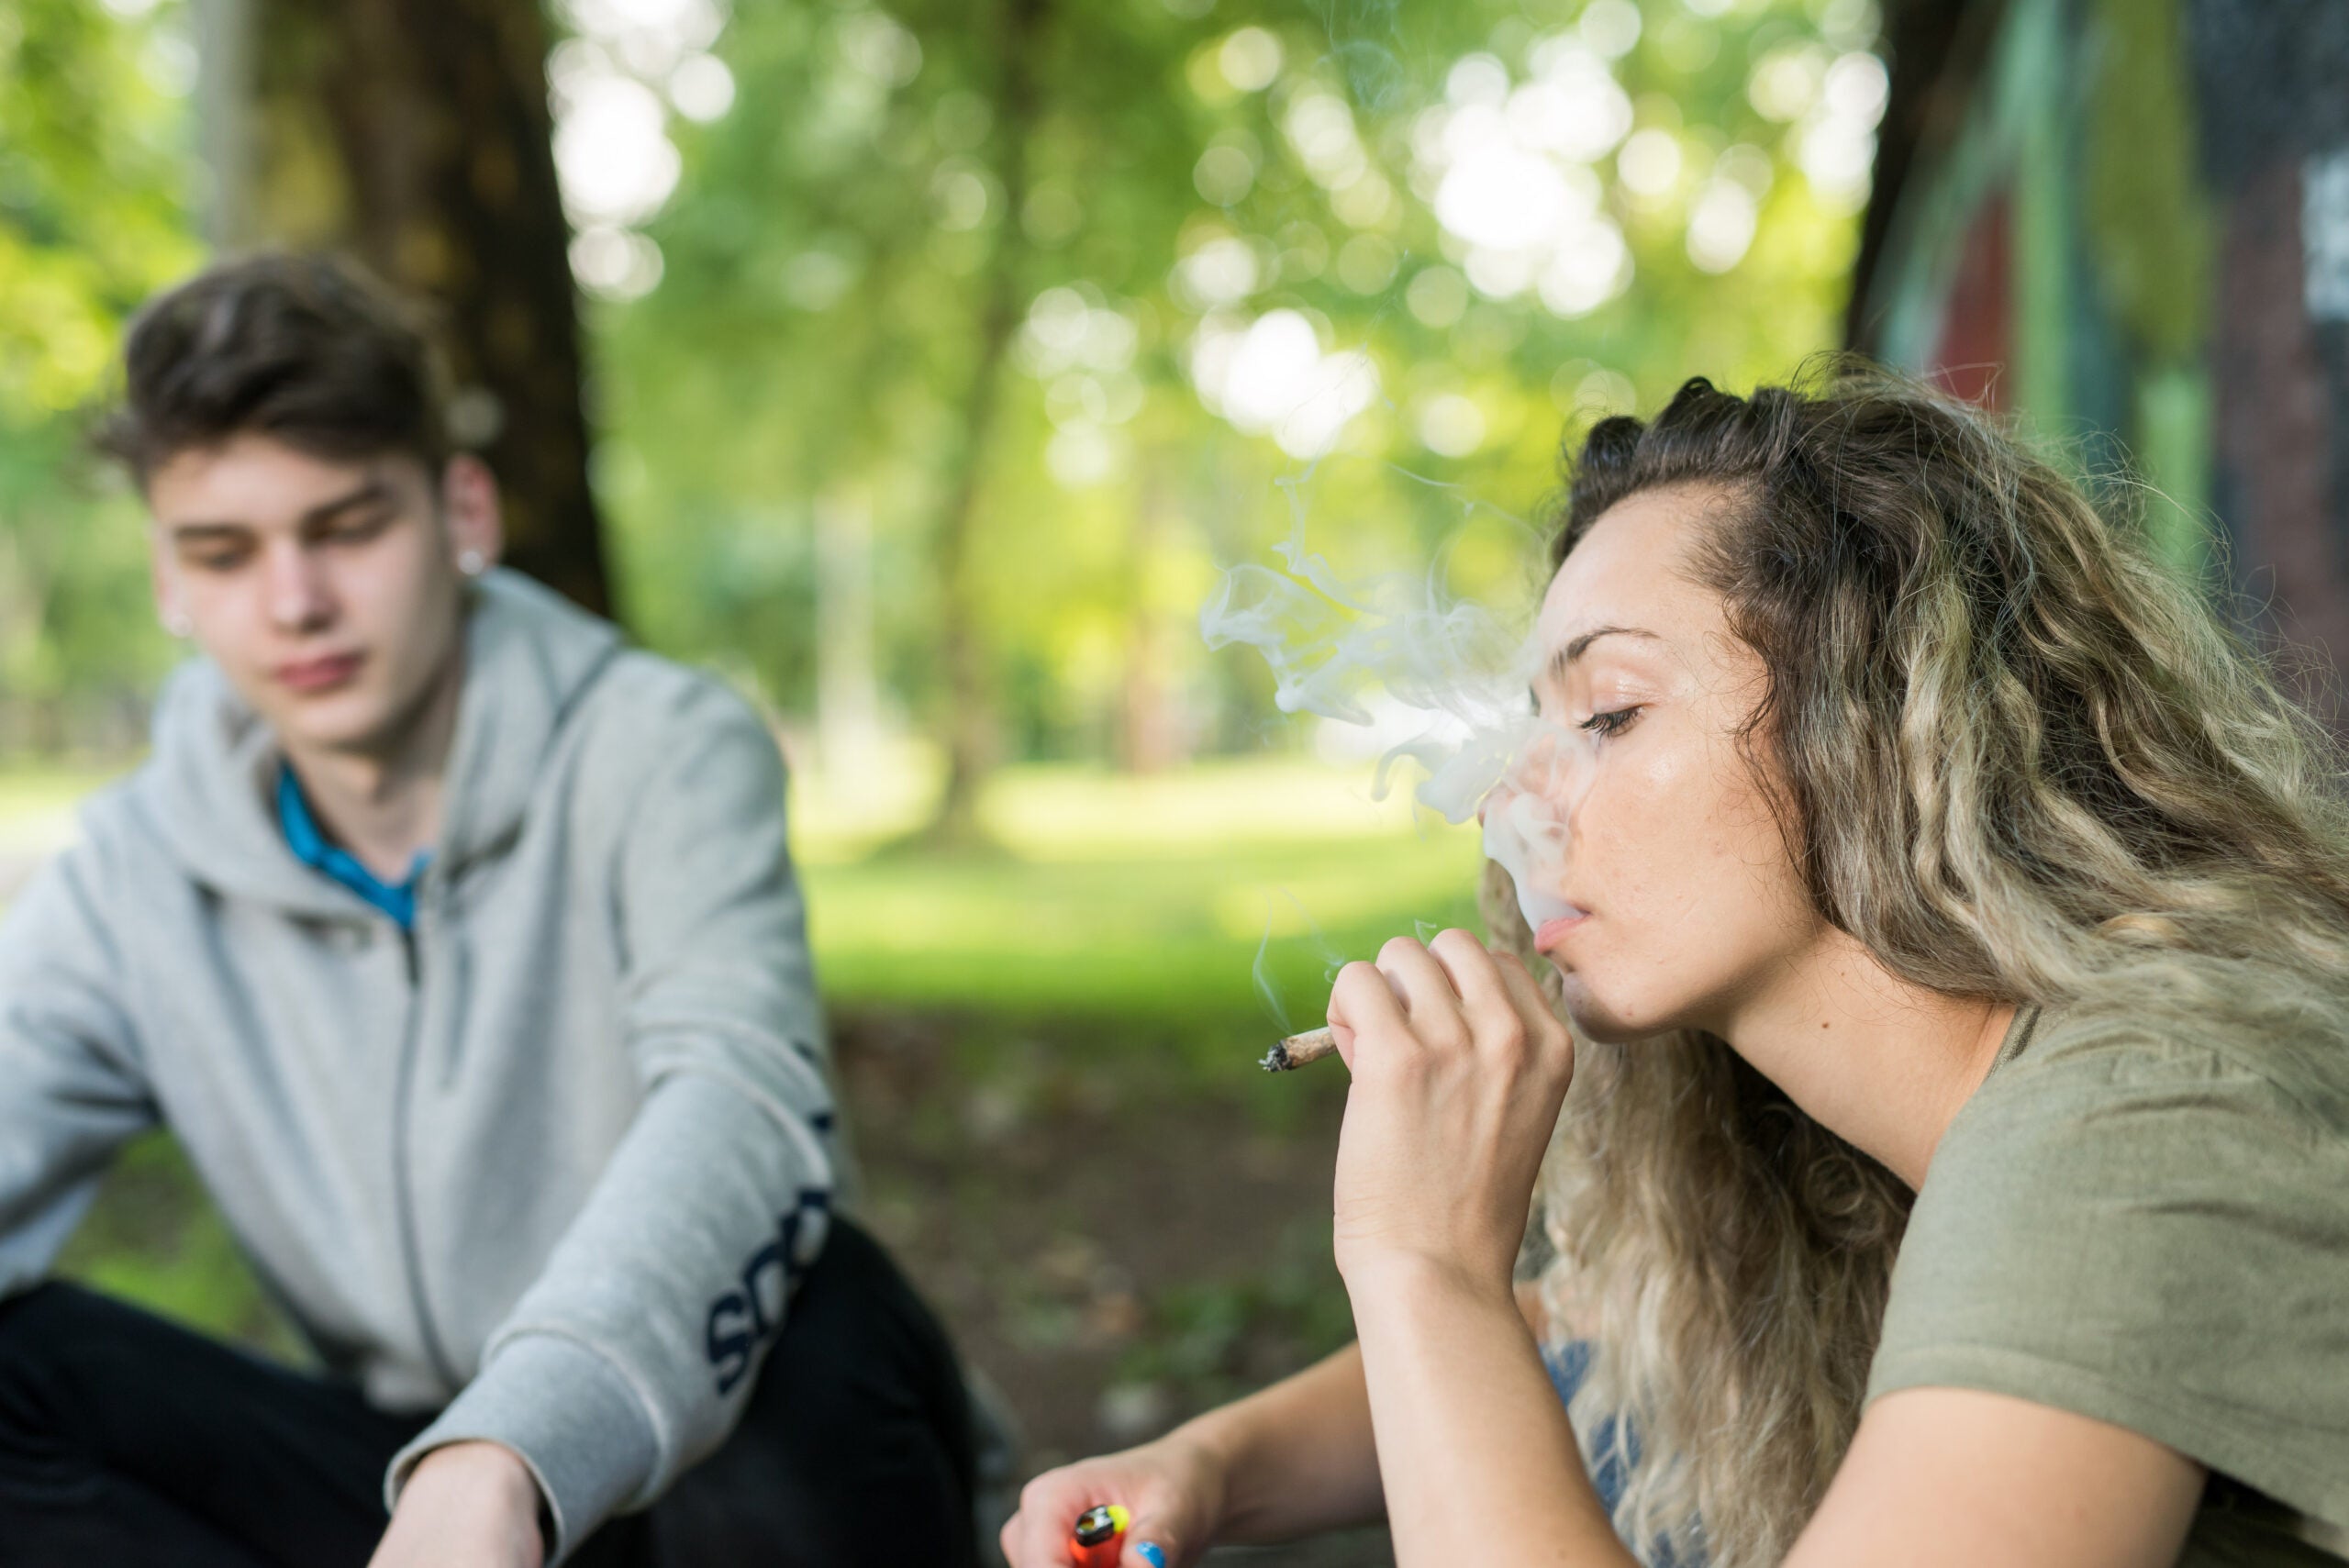 Youth Cannabis Use Has Remained Stable Since Legalization, Federally-Funded Study Shows